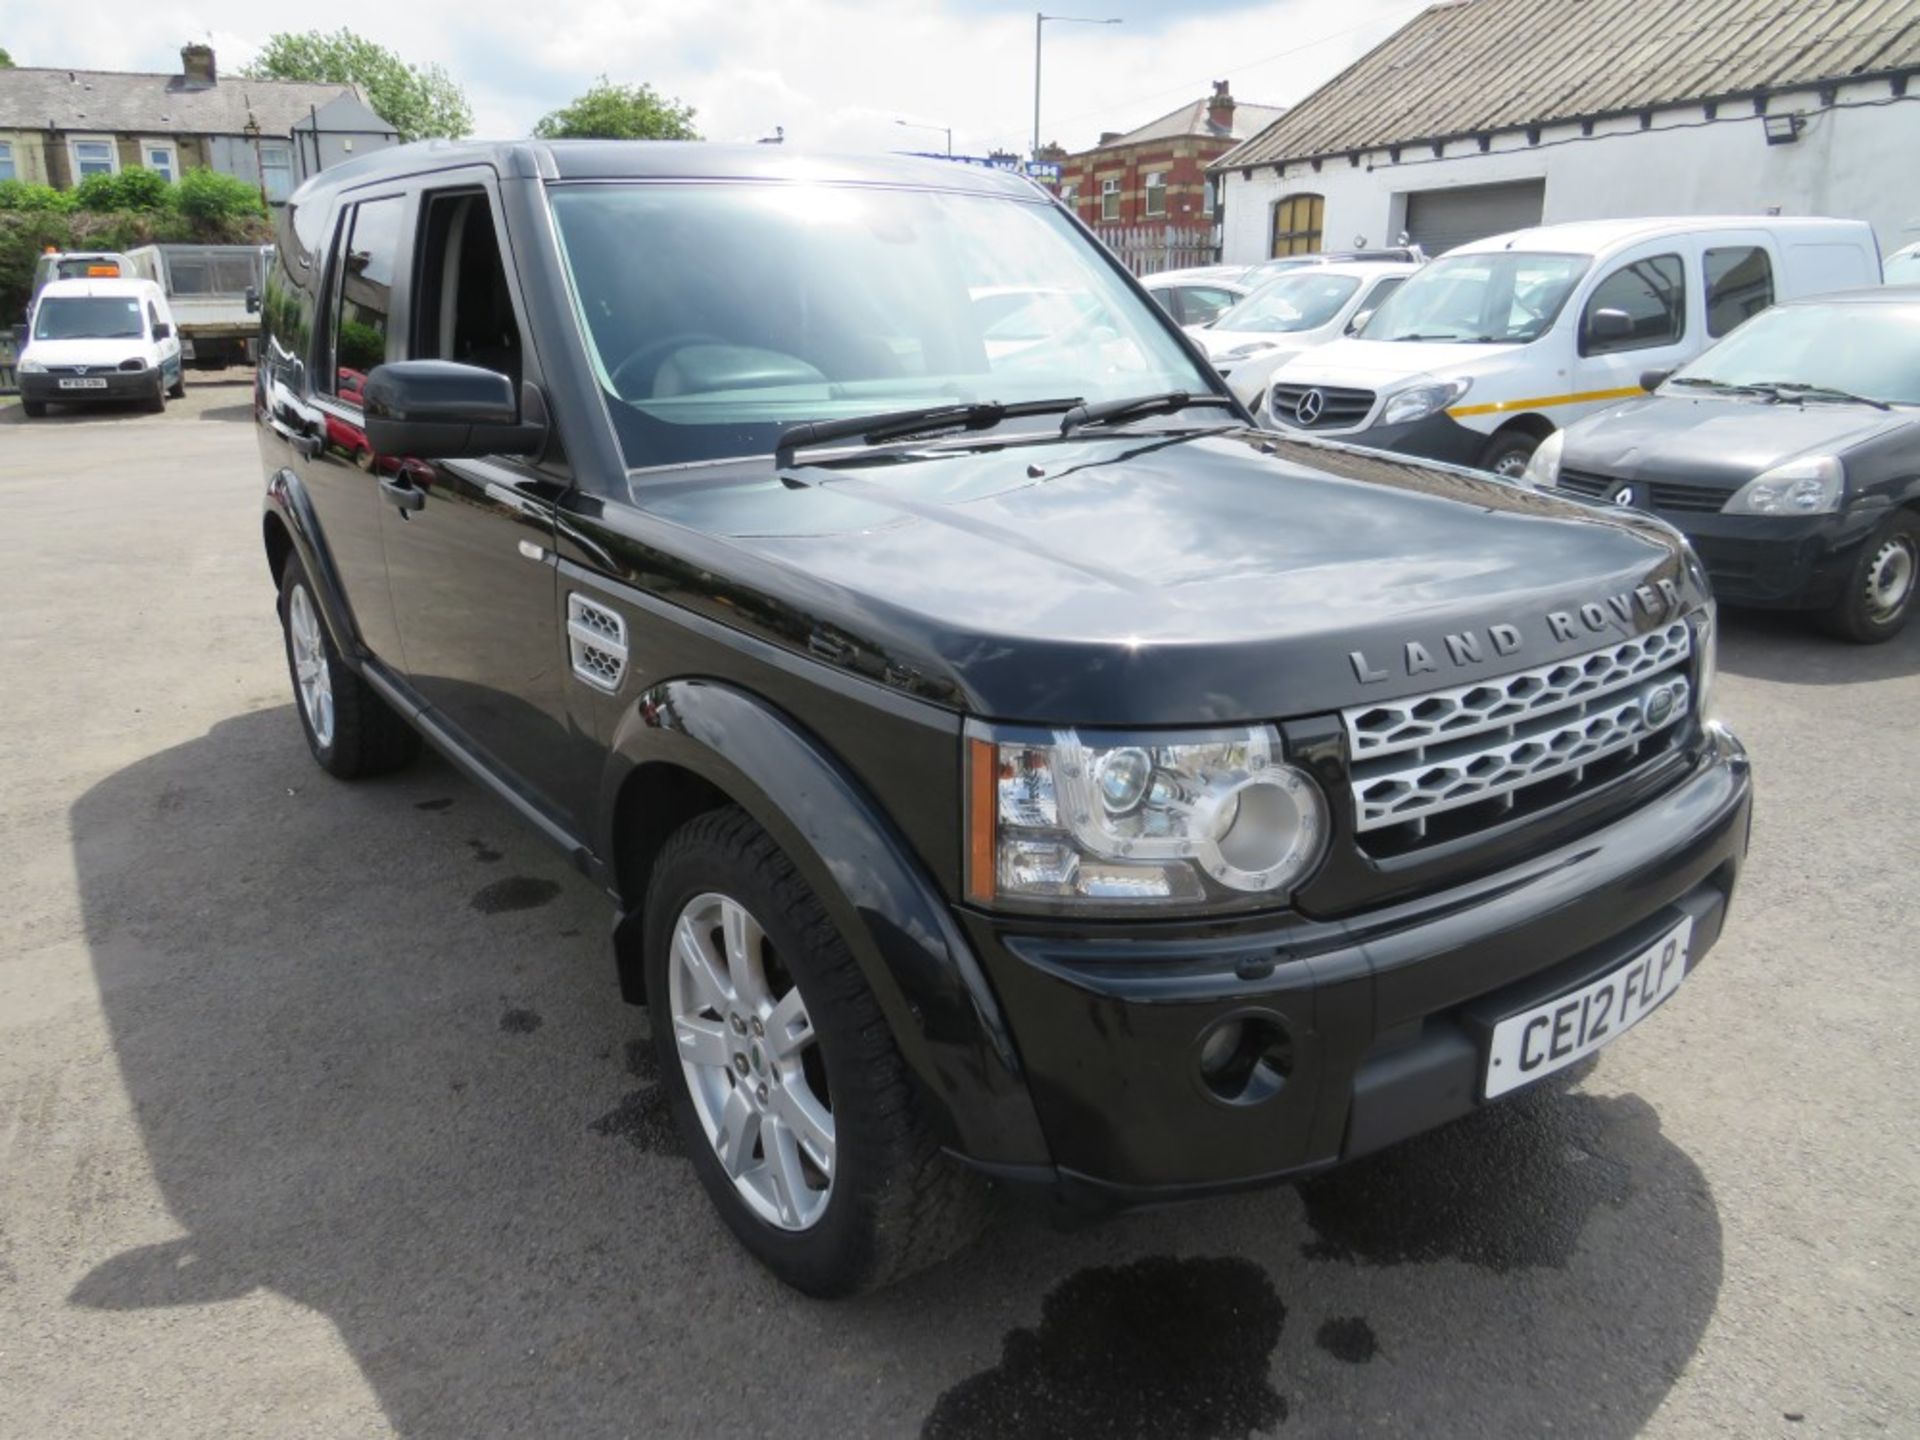 12 reg LAND ROVER DISCOVERY SDV6 AUTO 255 - Â£4000 SEAT CONVERSION IN BACK, 1ST REG 03/12, TEST 01/